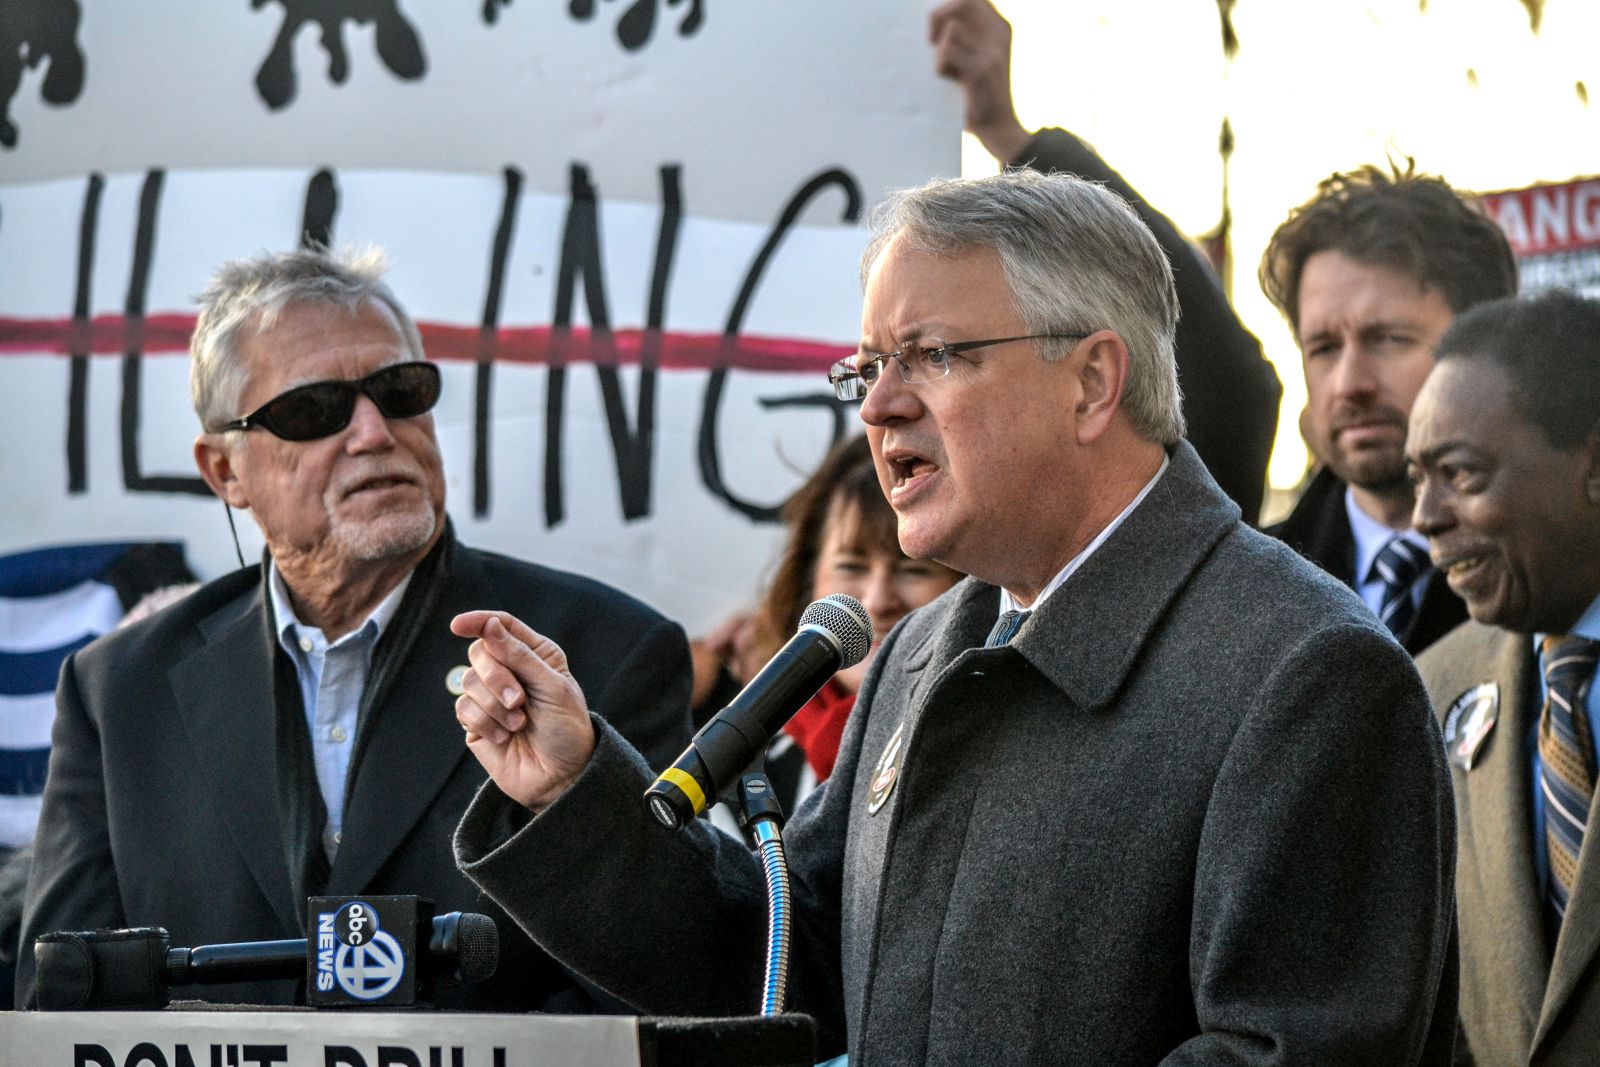 Charleston Mayor John Tecklenburg speaks against seismic blasting tests off the coast of South Carolina in December 2018. A district court judge has ordered the federal government to turn over within 45 days all documents about its decision to allow seismic tests. (Photo/File) 